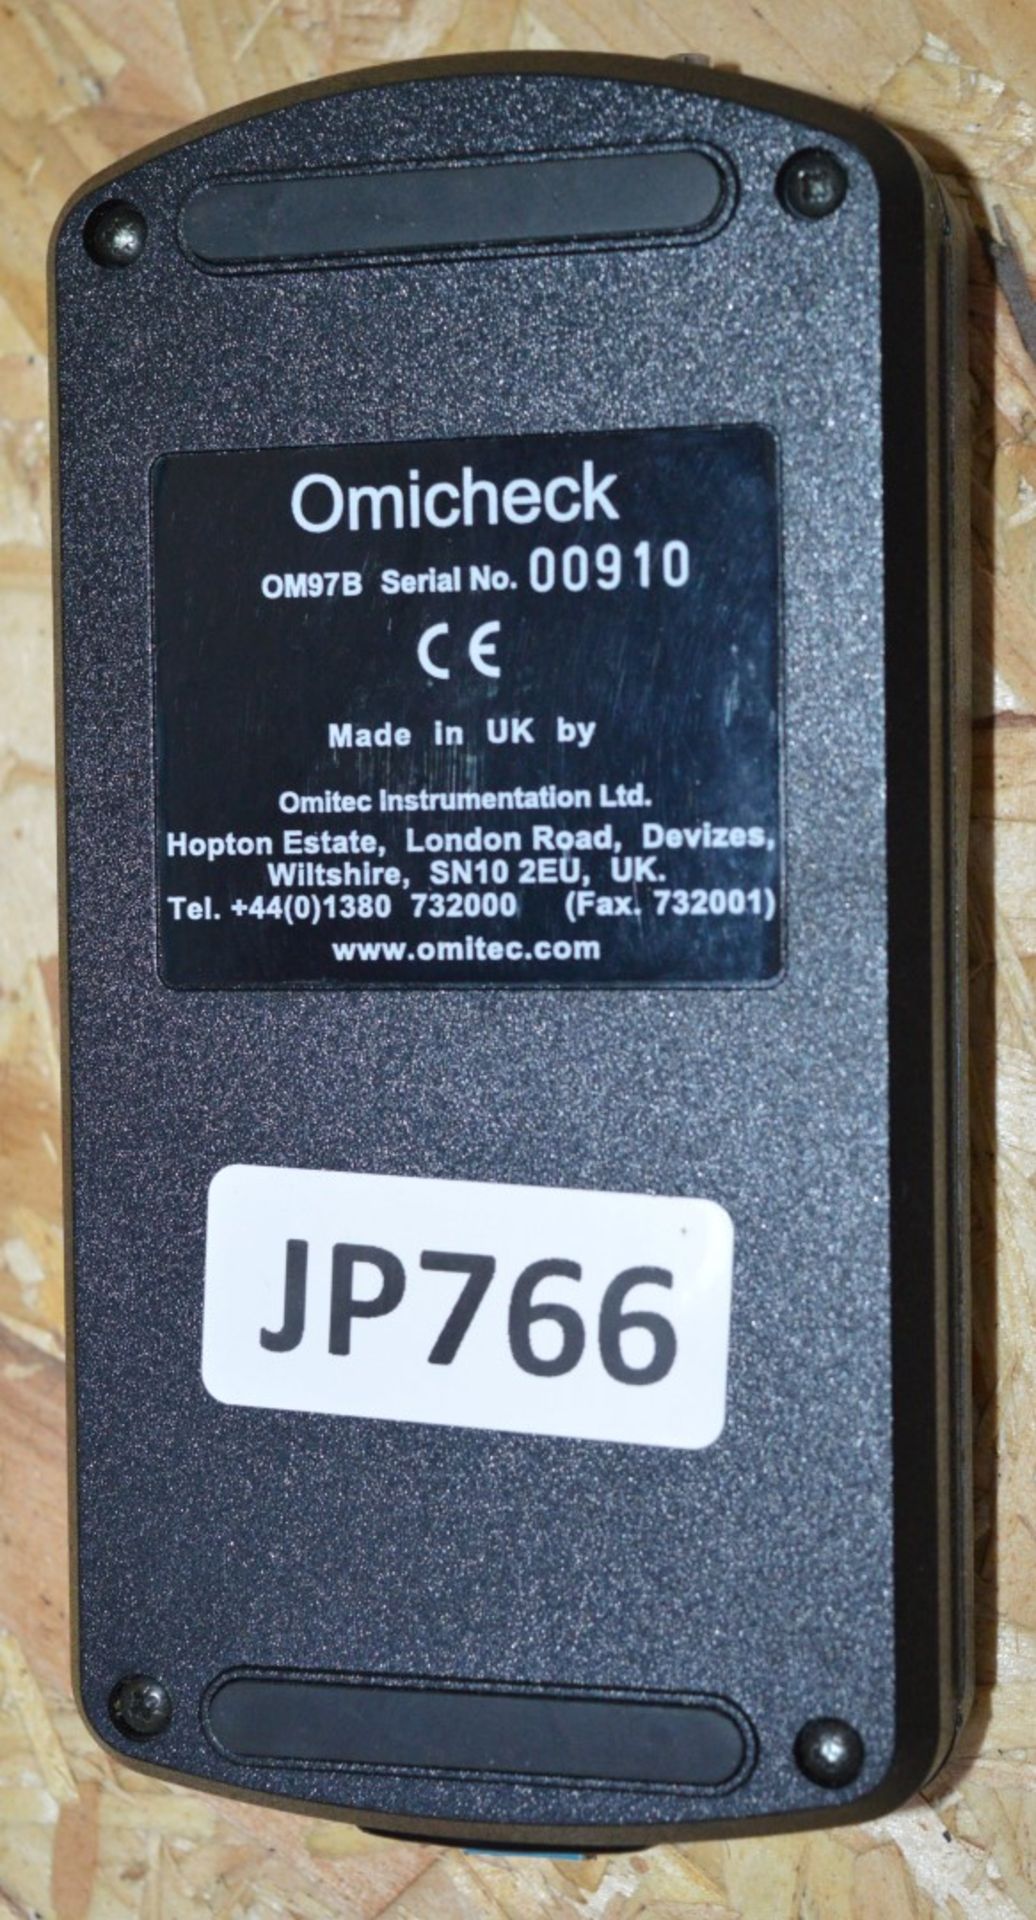 1 x Omitec OmiCheck Automotive Diagnostic Tool - Model OM97B - Good Condition - CL011 - Ref - Image 5 of 5